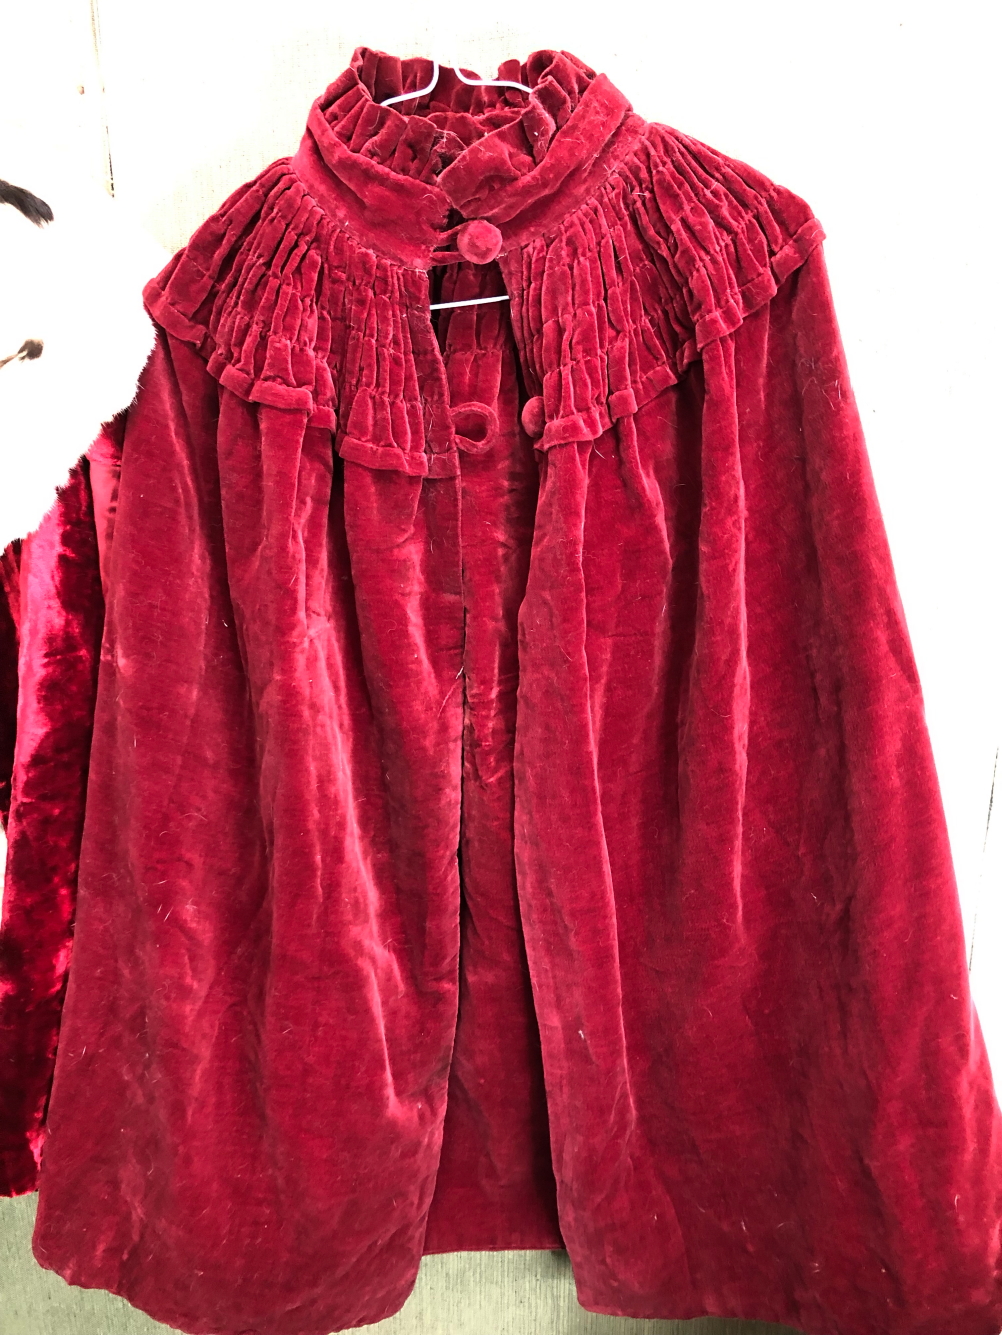 IRA LONDON, AN ERMINE FUR COLLARED RED VELVET JACKET WITH MATCHING SCARF AND MUFF, TOGETHER WITH A - Image 2 of 20